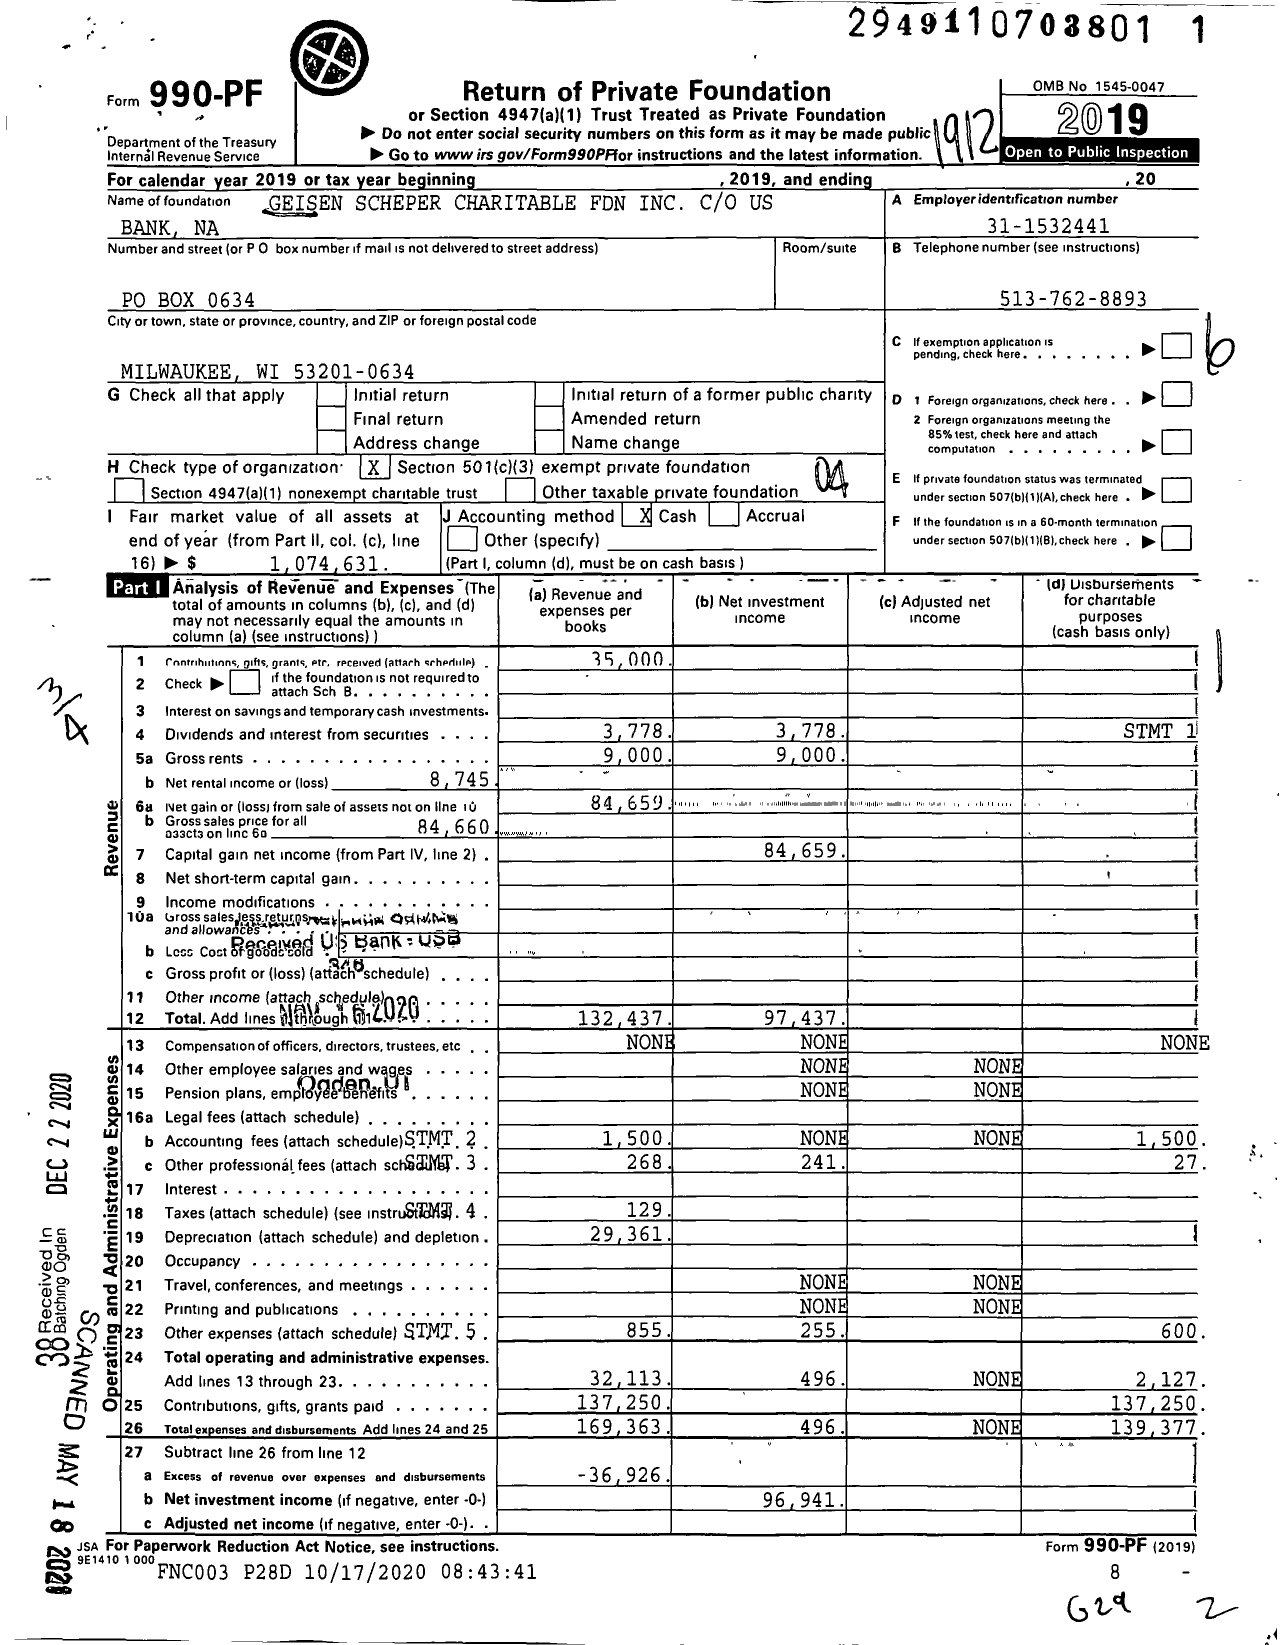 Image of first page of 2019 Form 990PF for Geisen Scheper Charitable Foundation